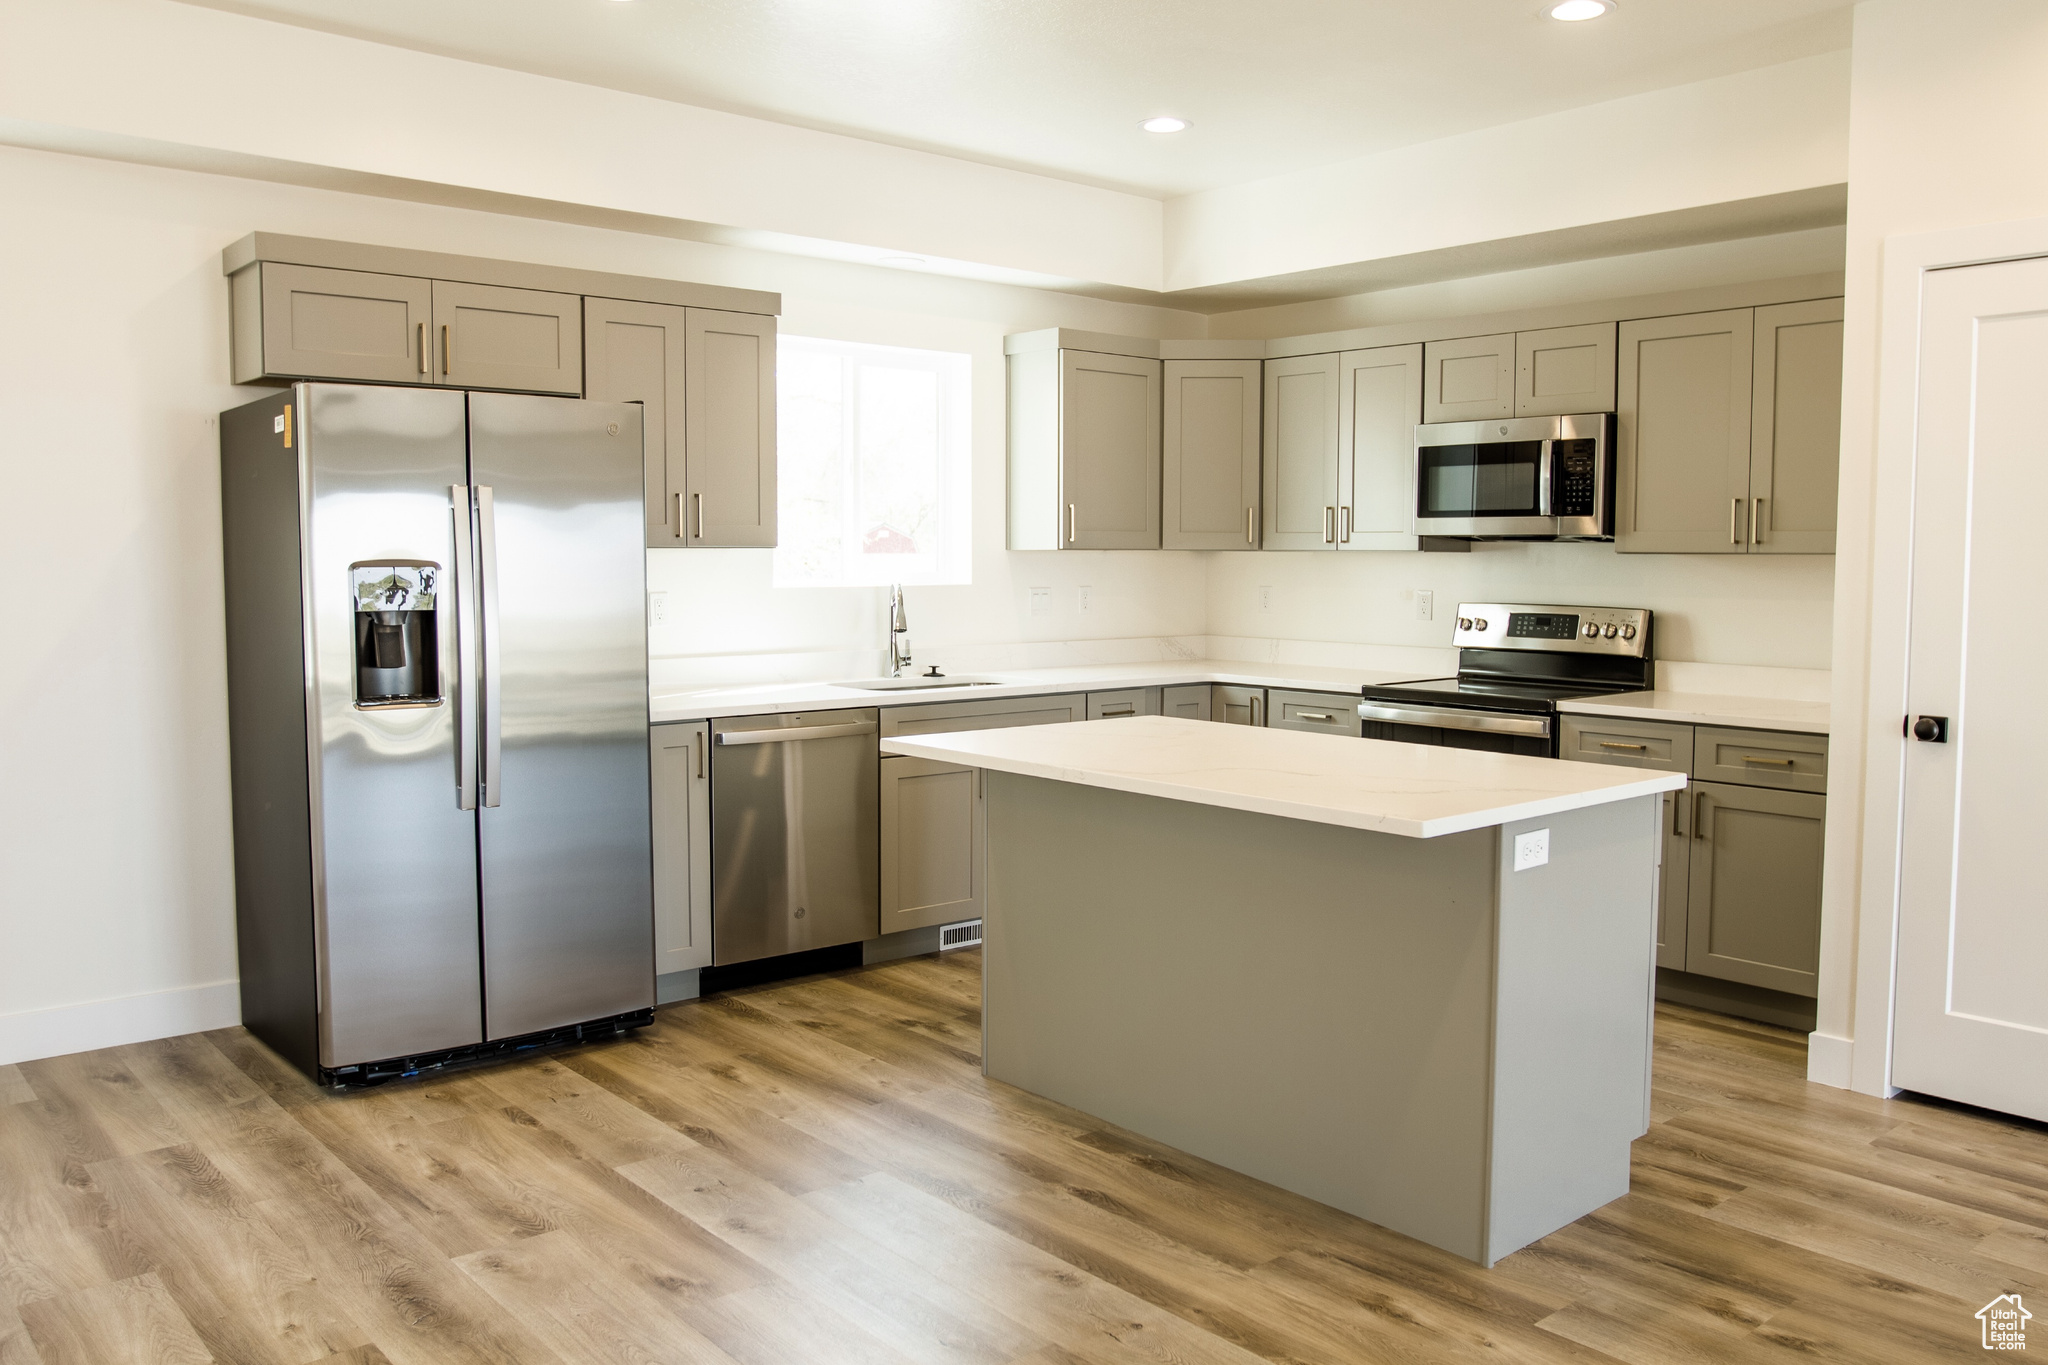 Kitchen with a center island, LVP flooring, gray cabinetry, stainless steel appliances, and sink